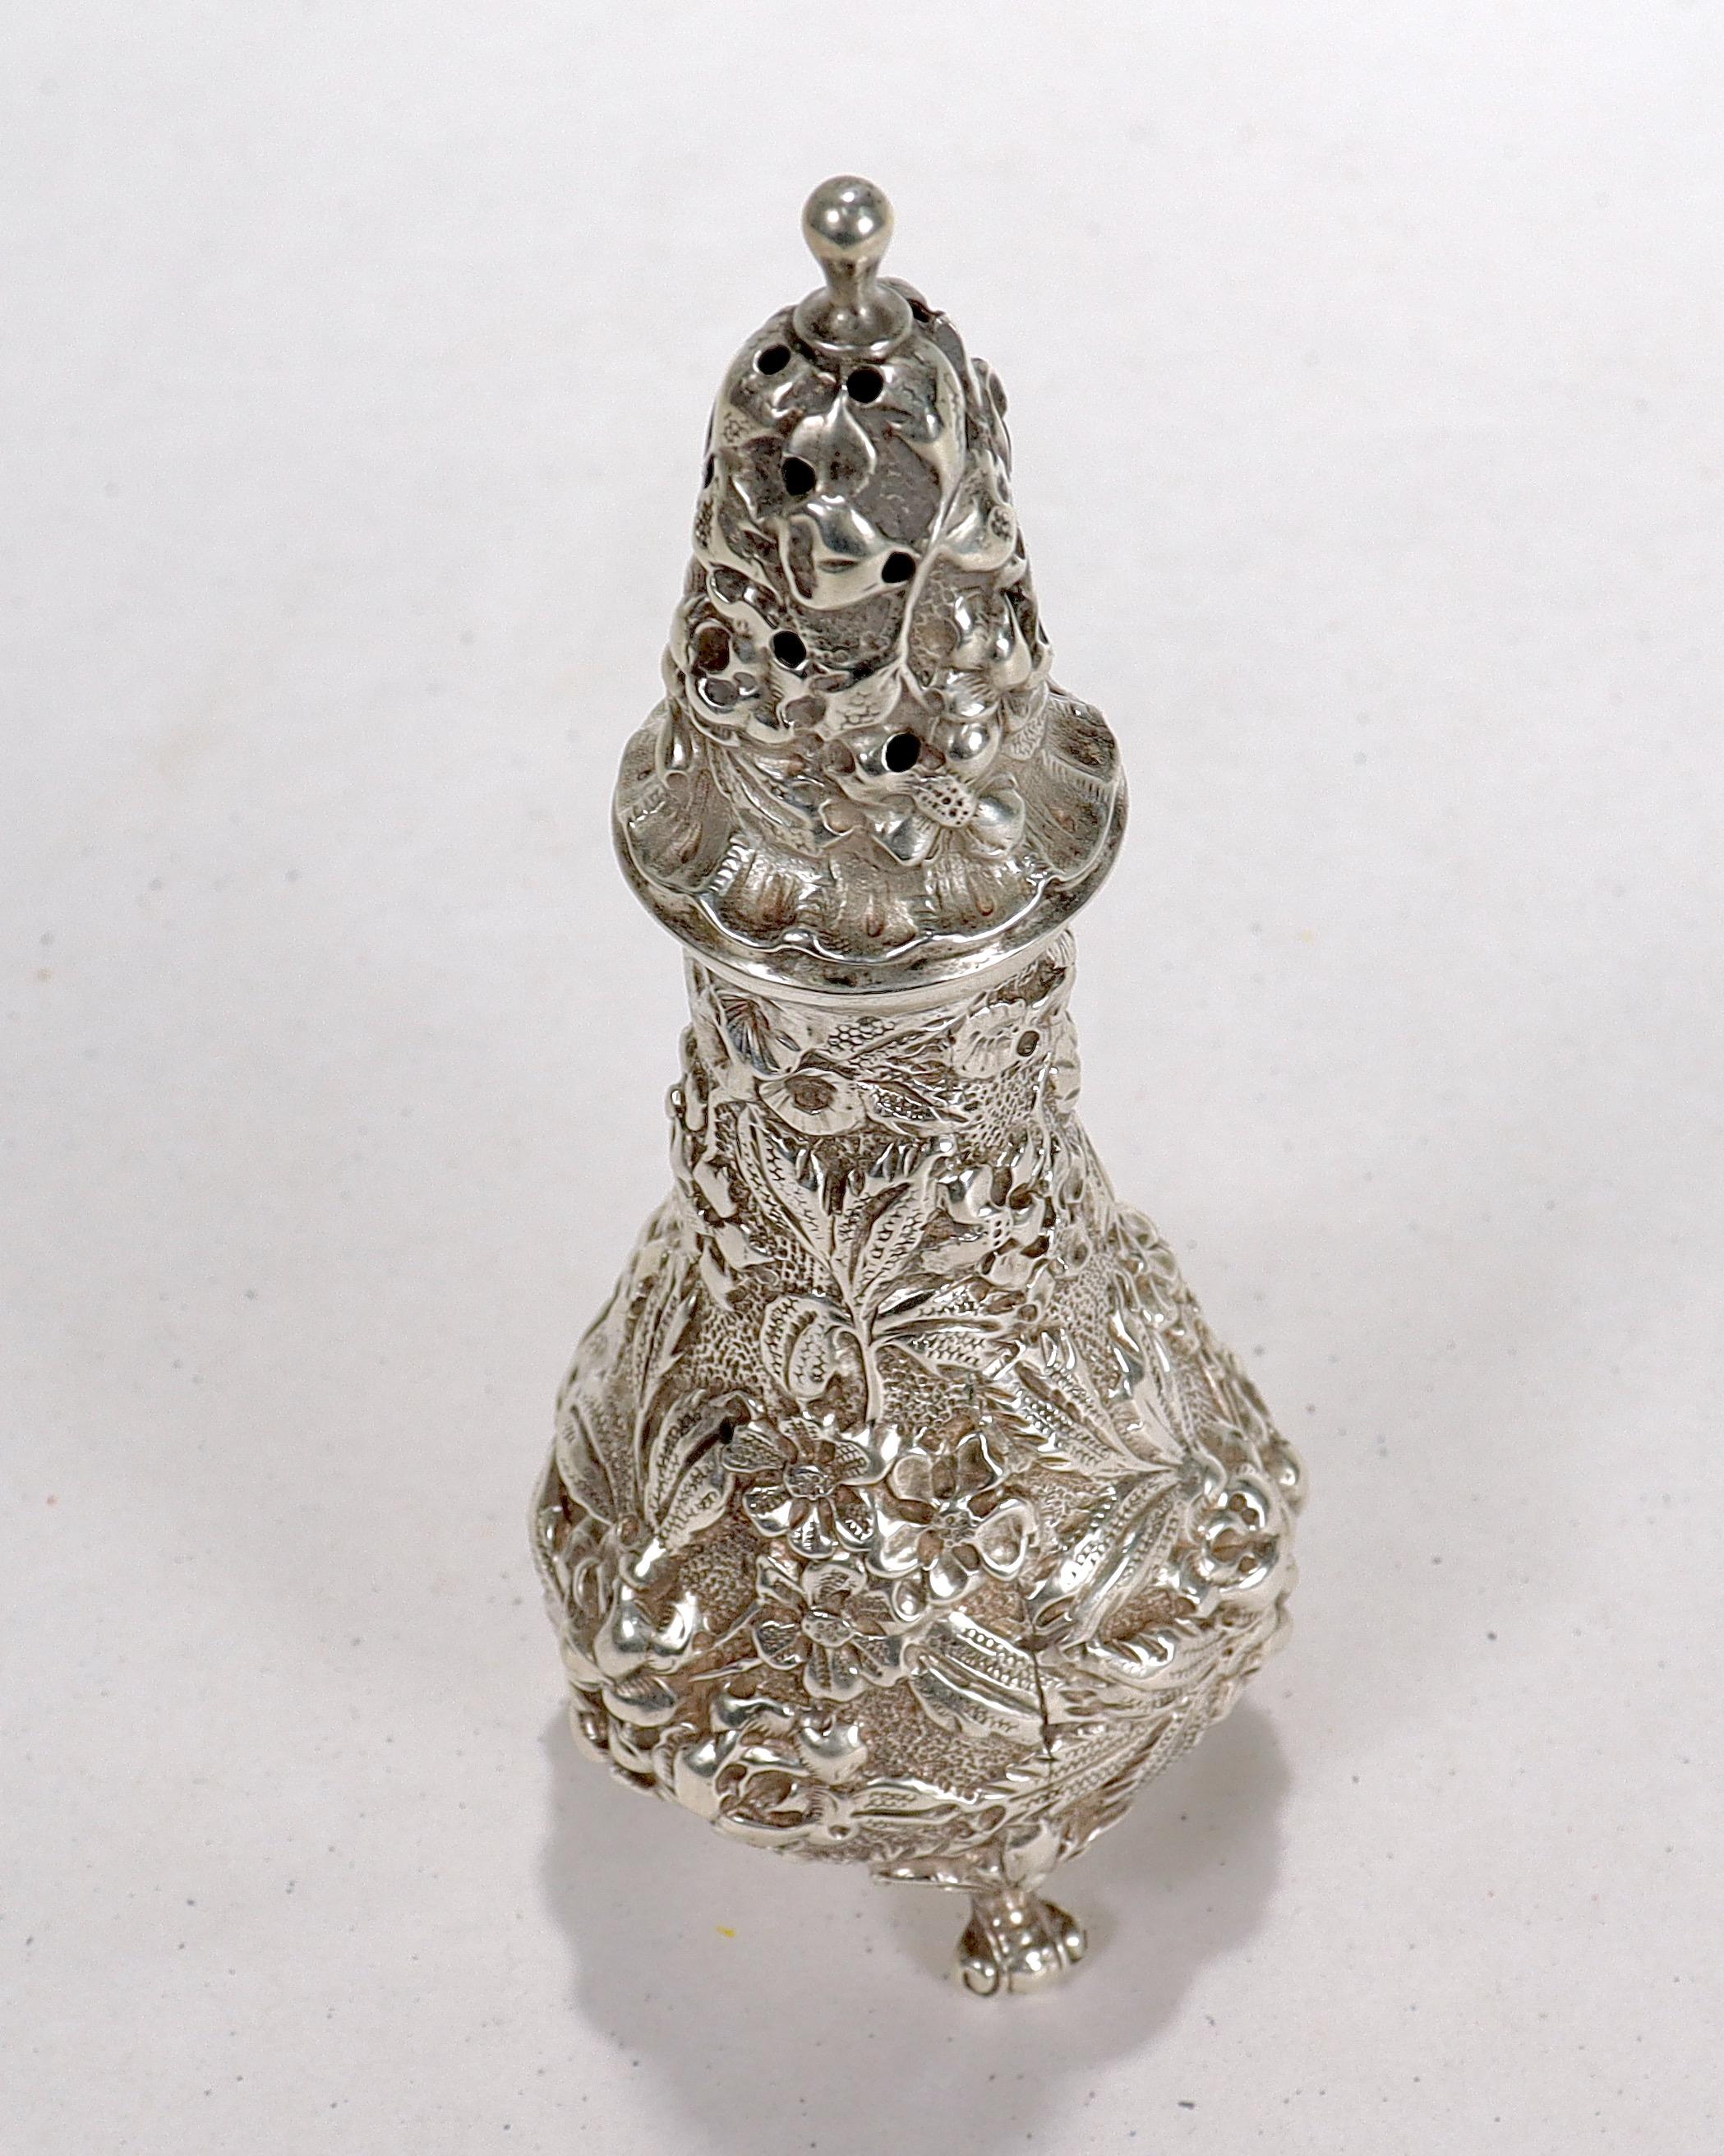 Gilded Age Antique Stieff Sterling Silver Repousse Salt Shaker For Sale